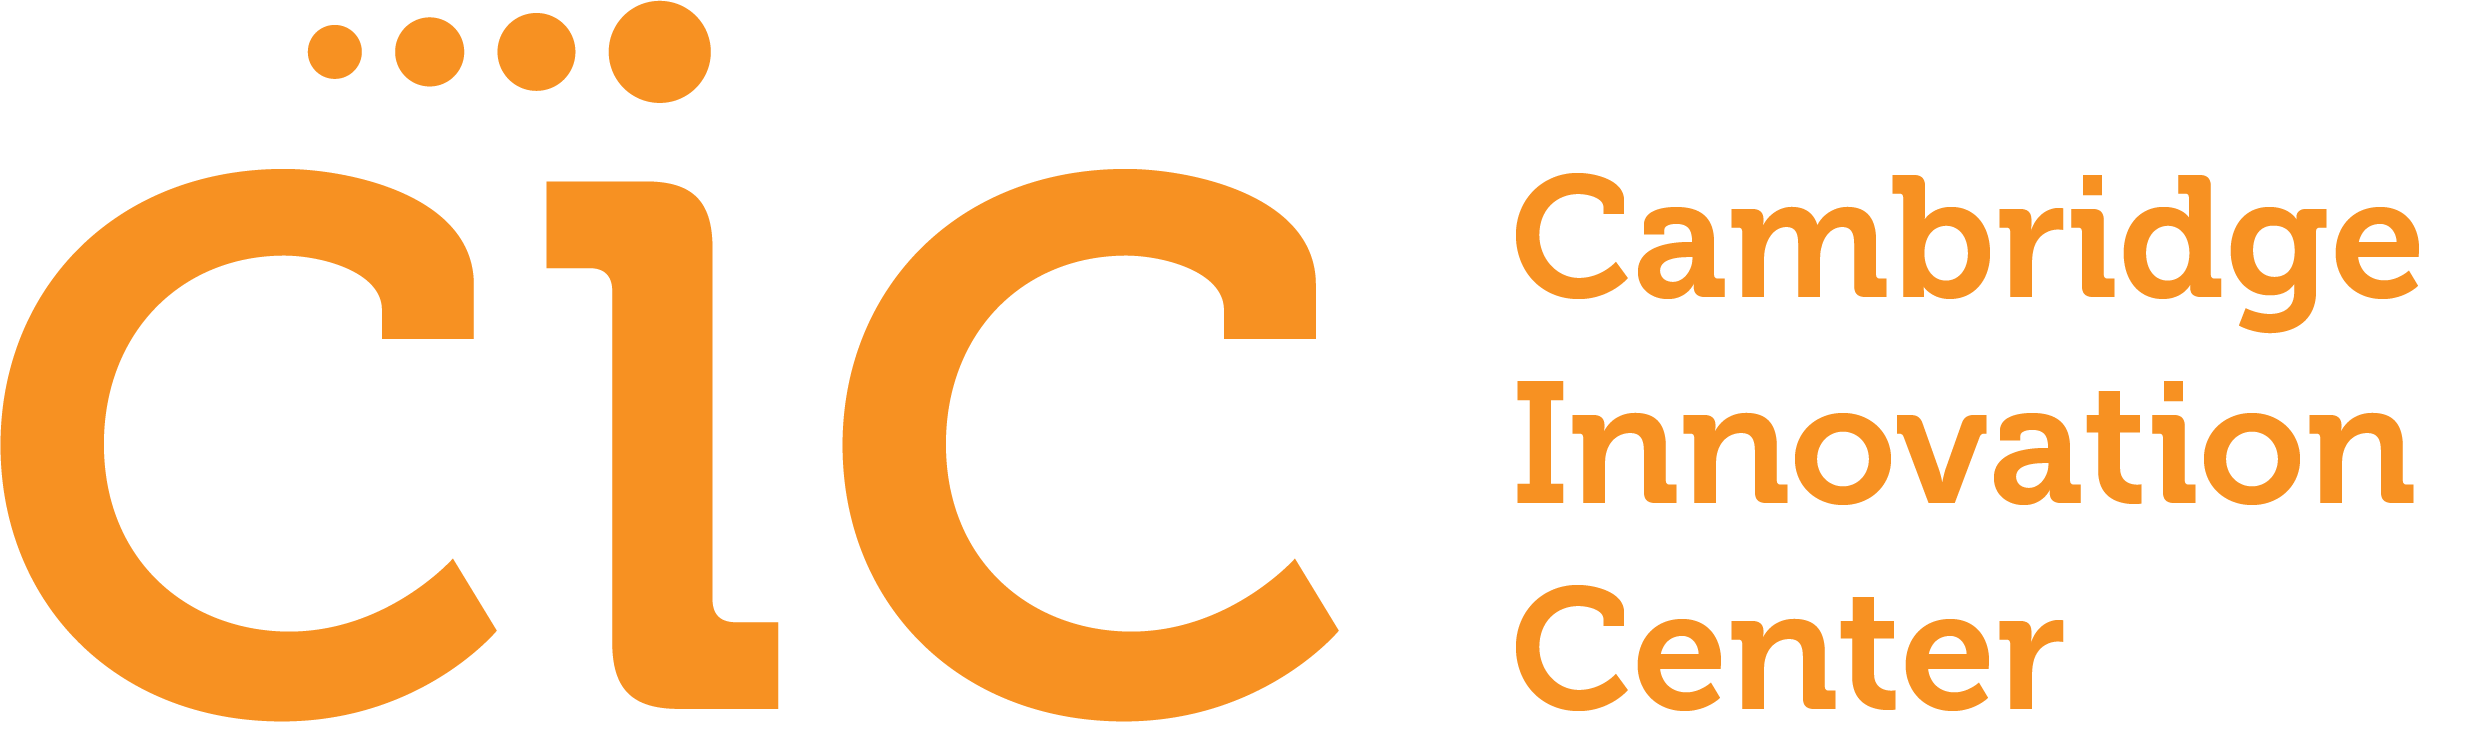 https://www.paperlessparts.com/wp-content/uploads/CIC245Logo.png